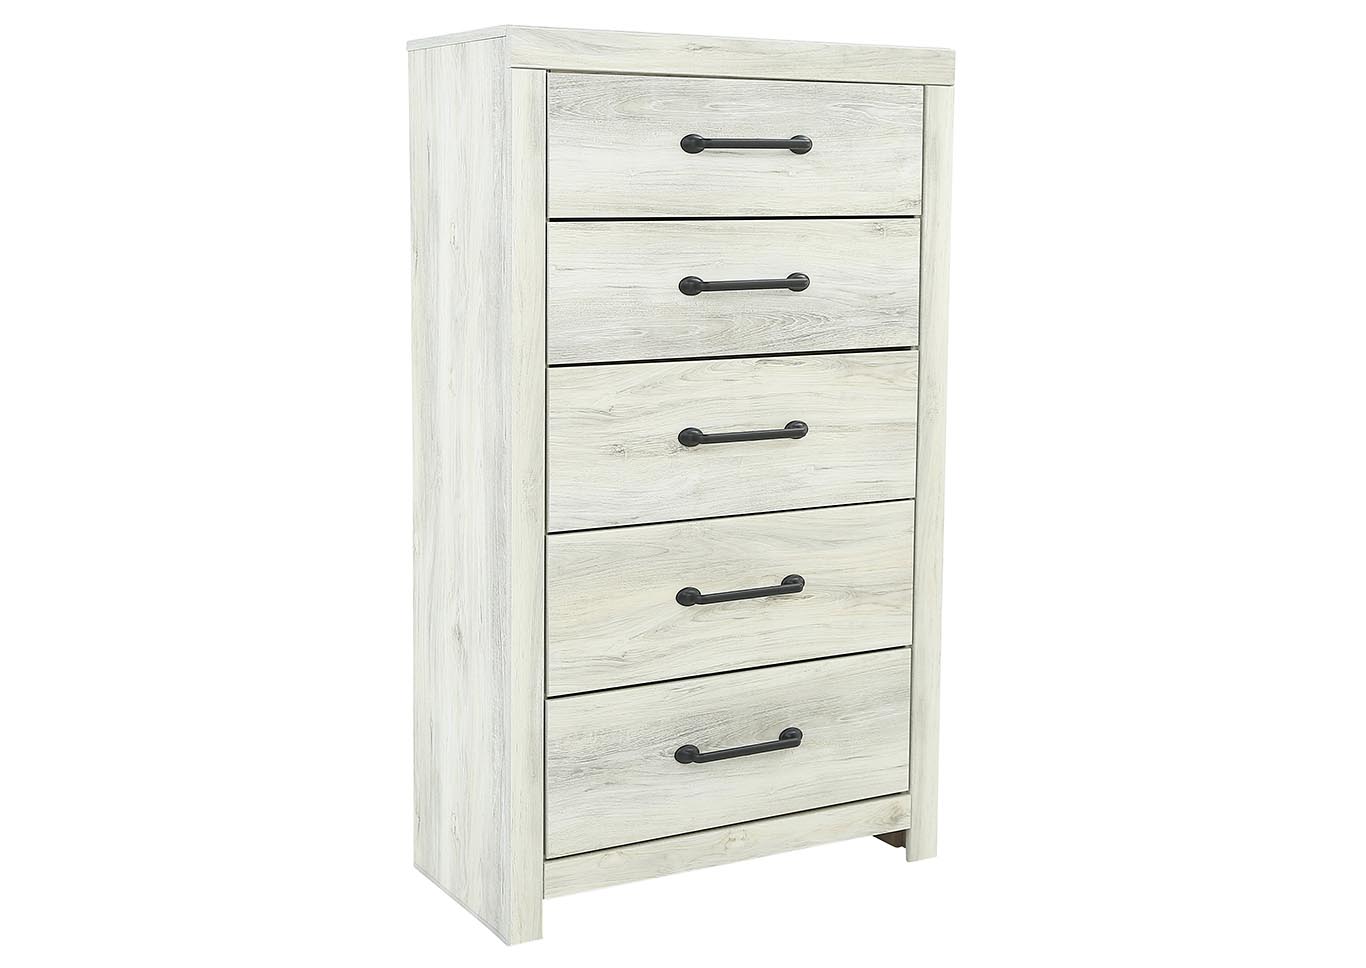 CAMBECK FIVE DRAWER CHEST,ASHLEY FURNITURE INC.